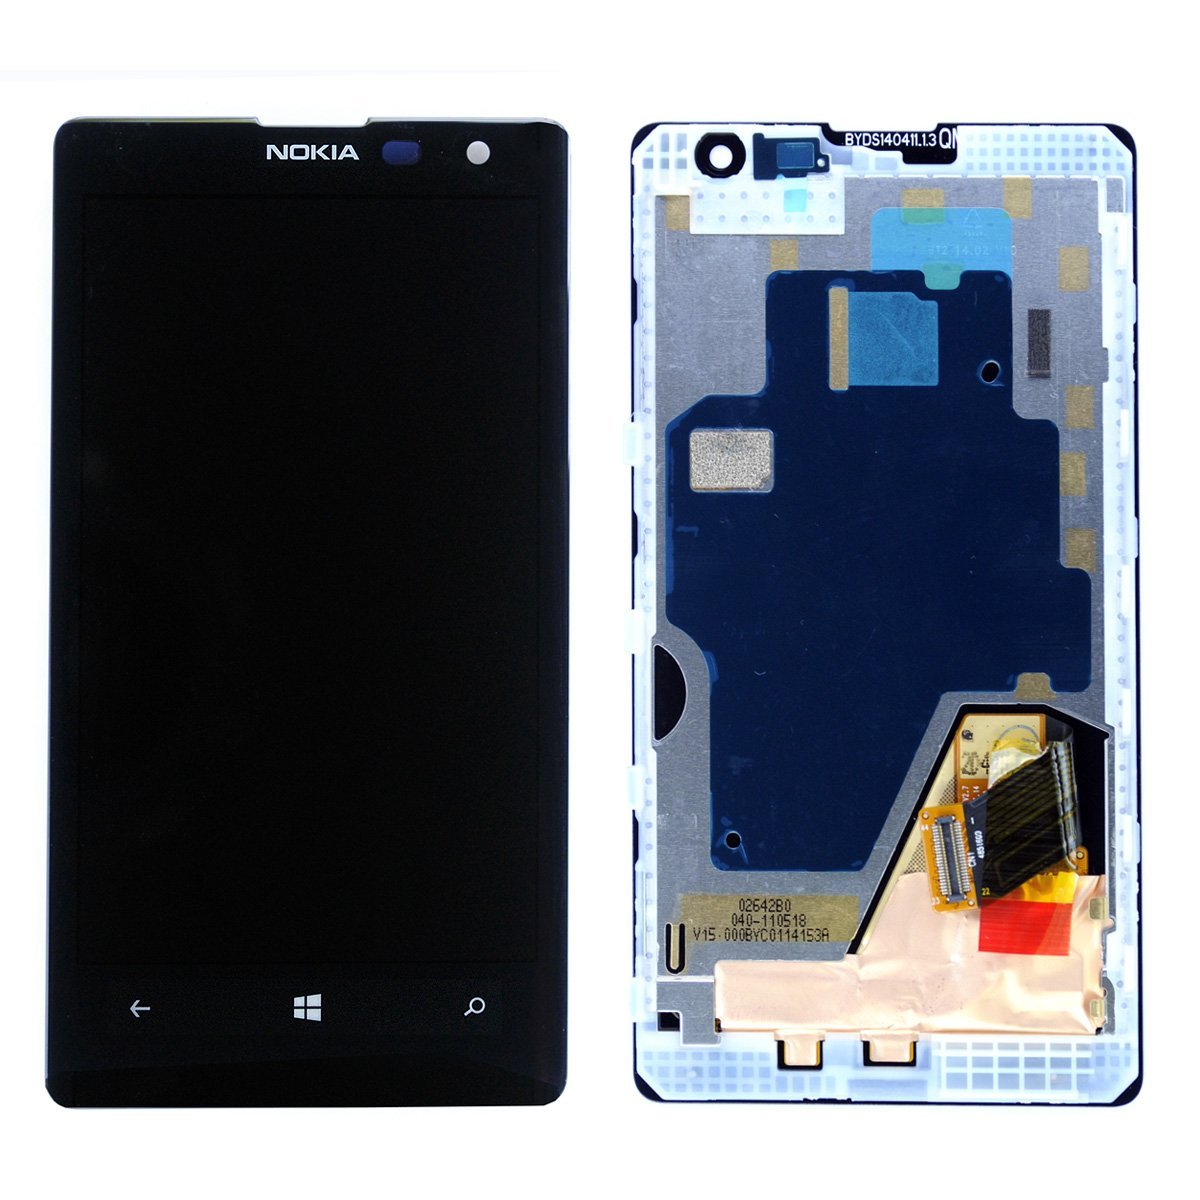 Nokia Lumia 1020 LCD Screen Display + Digitizer Touch Glass + Frame Assembly OEM